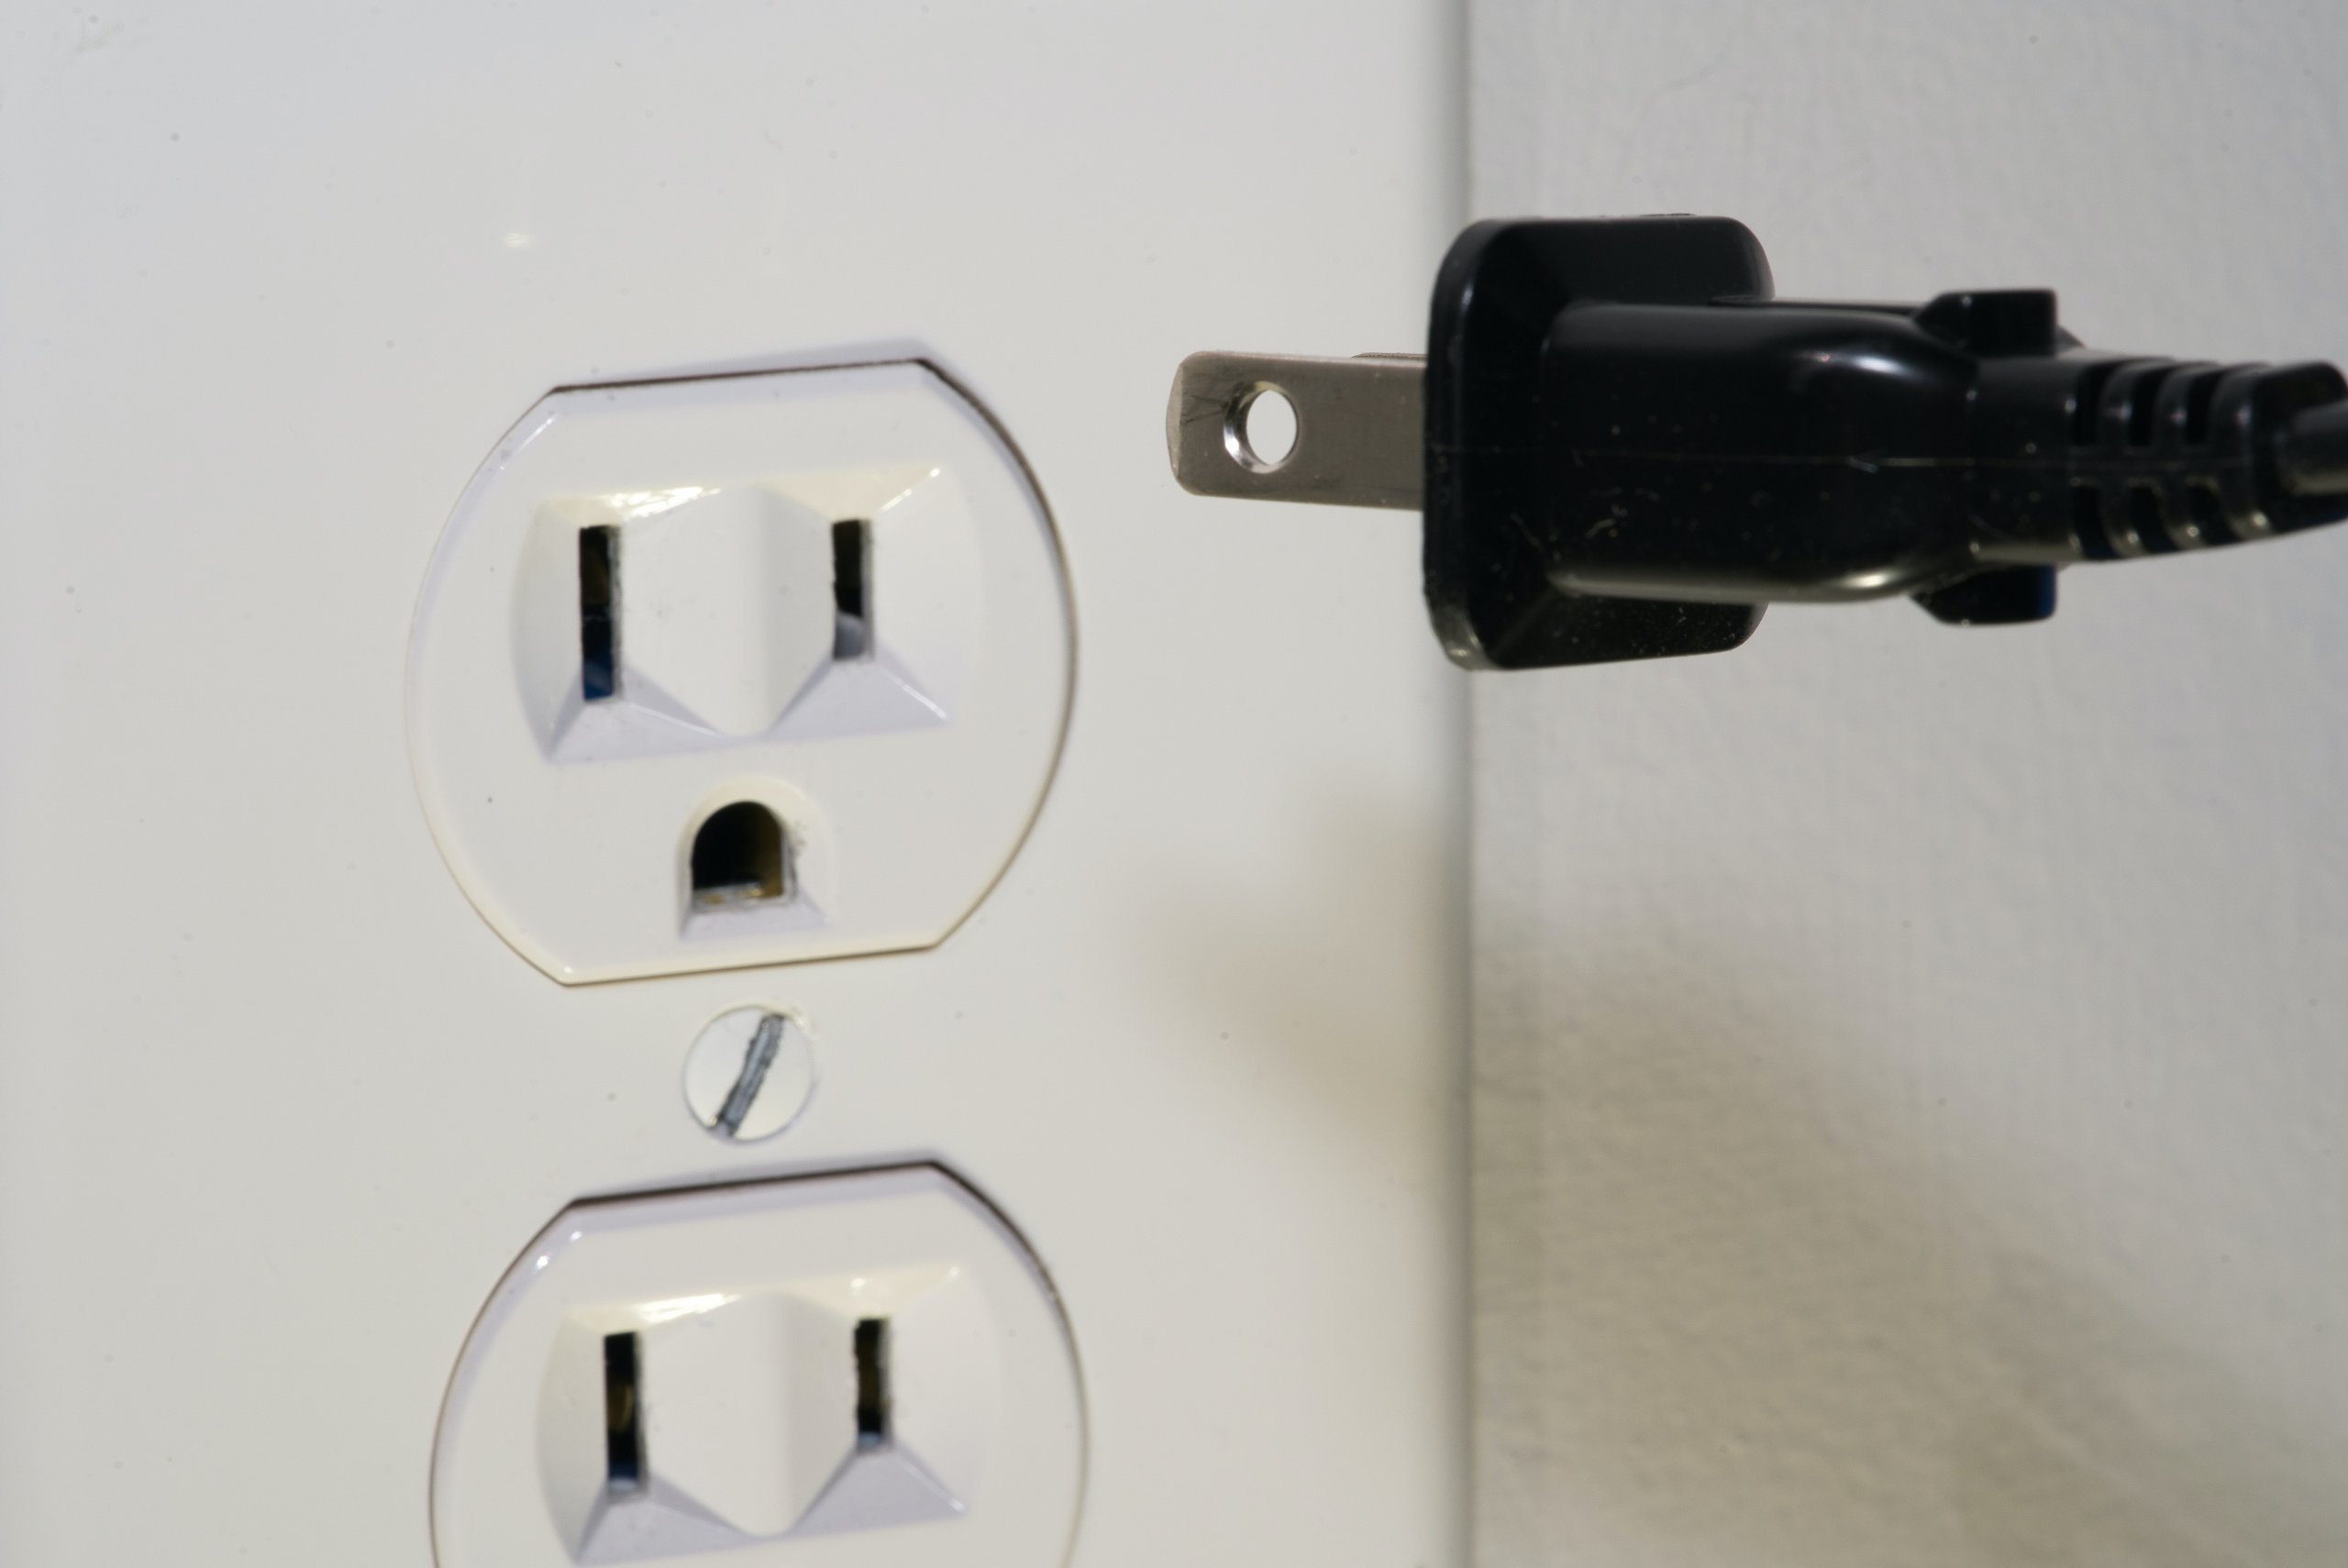 A close-up of an electrical outlet and plug